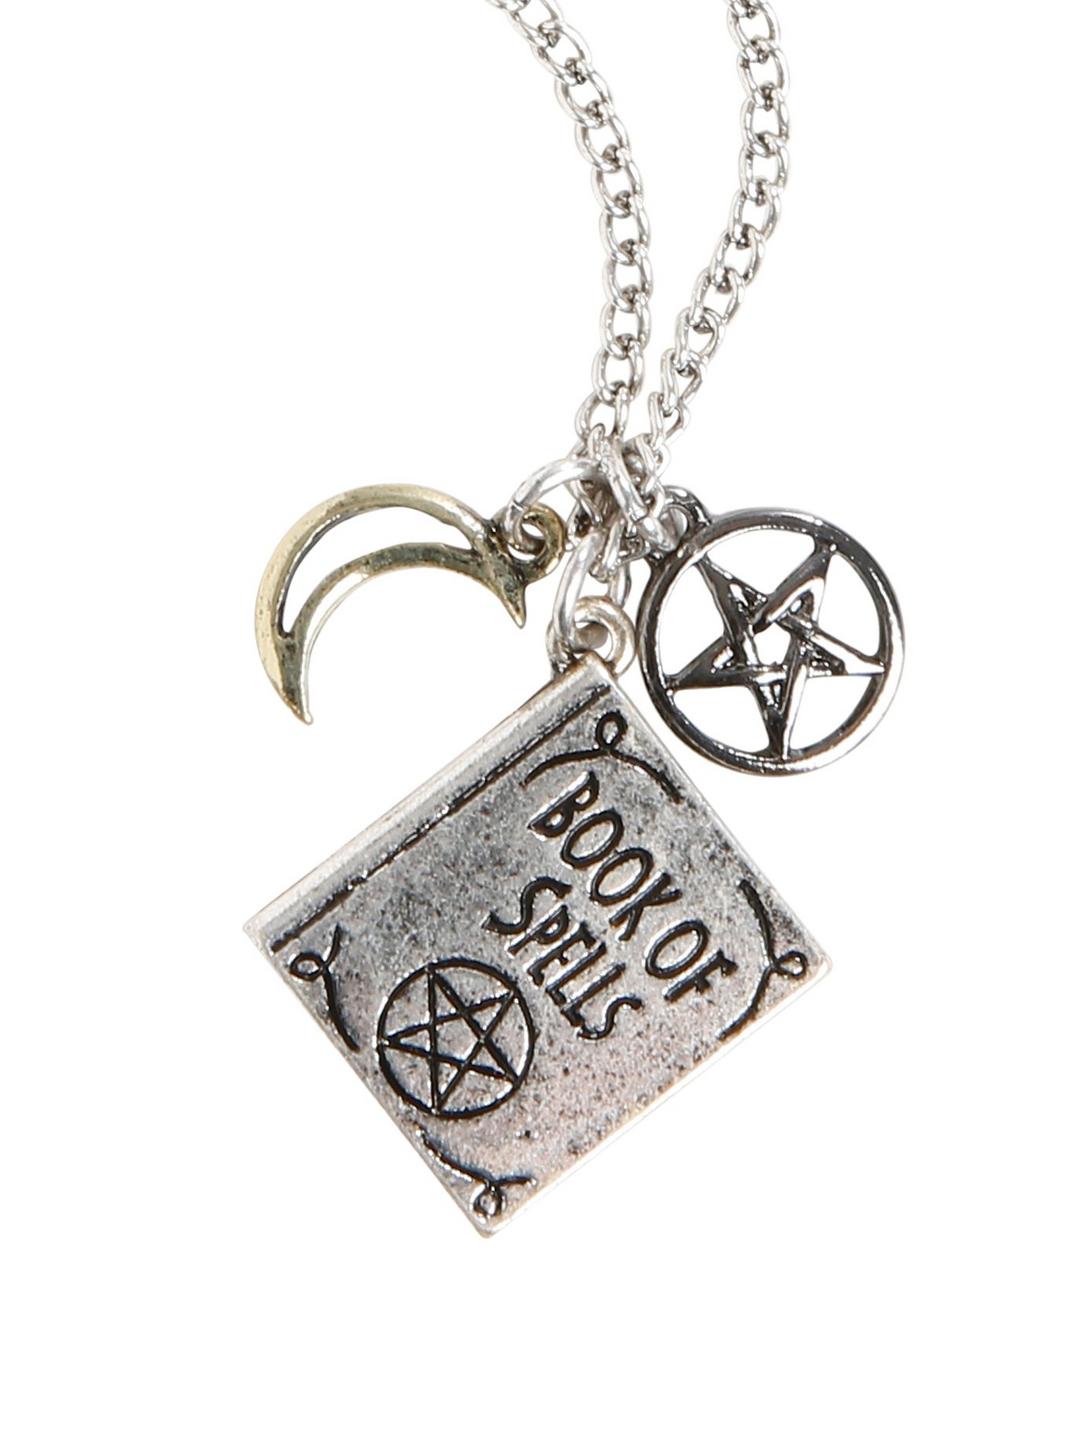 Book Of Spells Charm Necklace, , hi-res